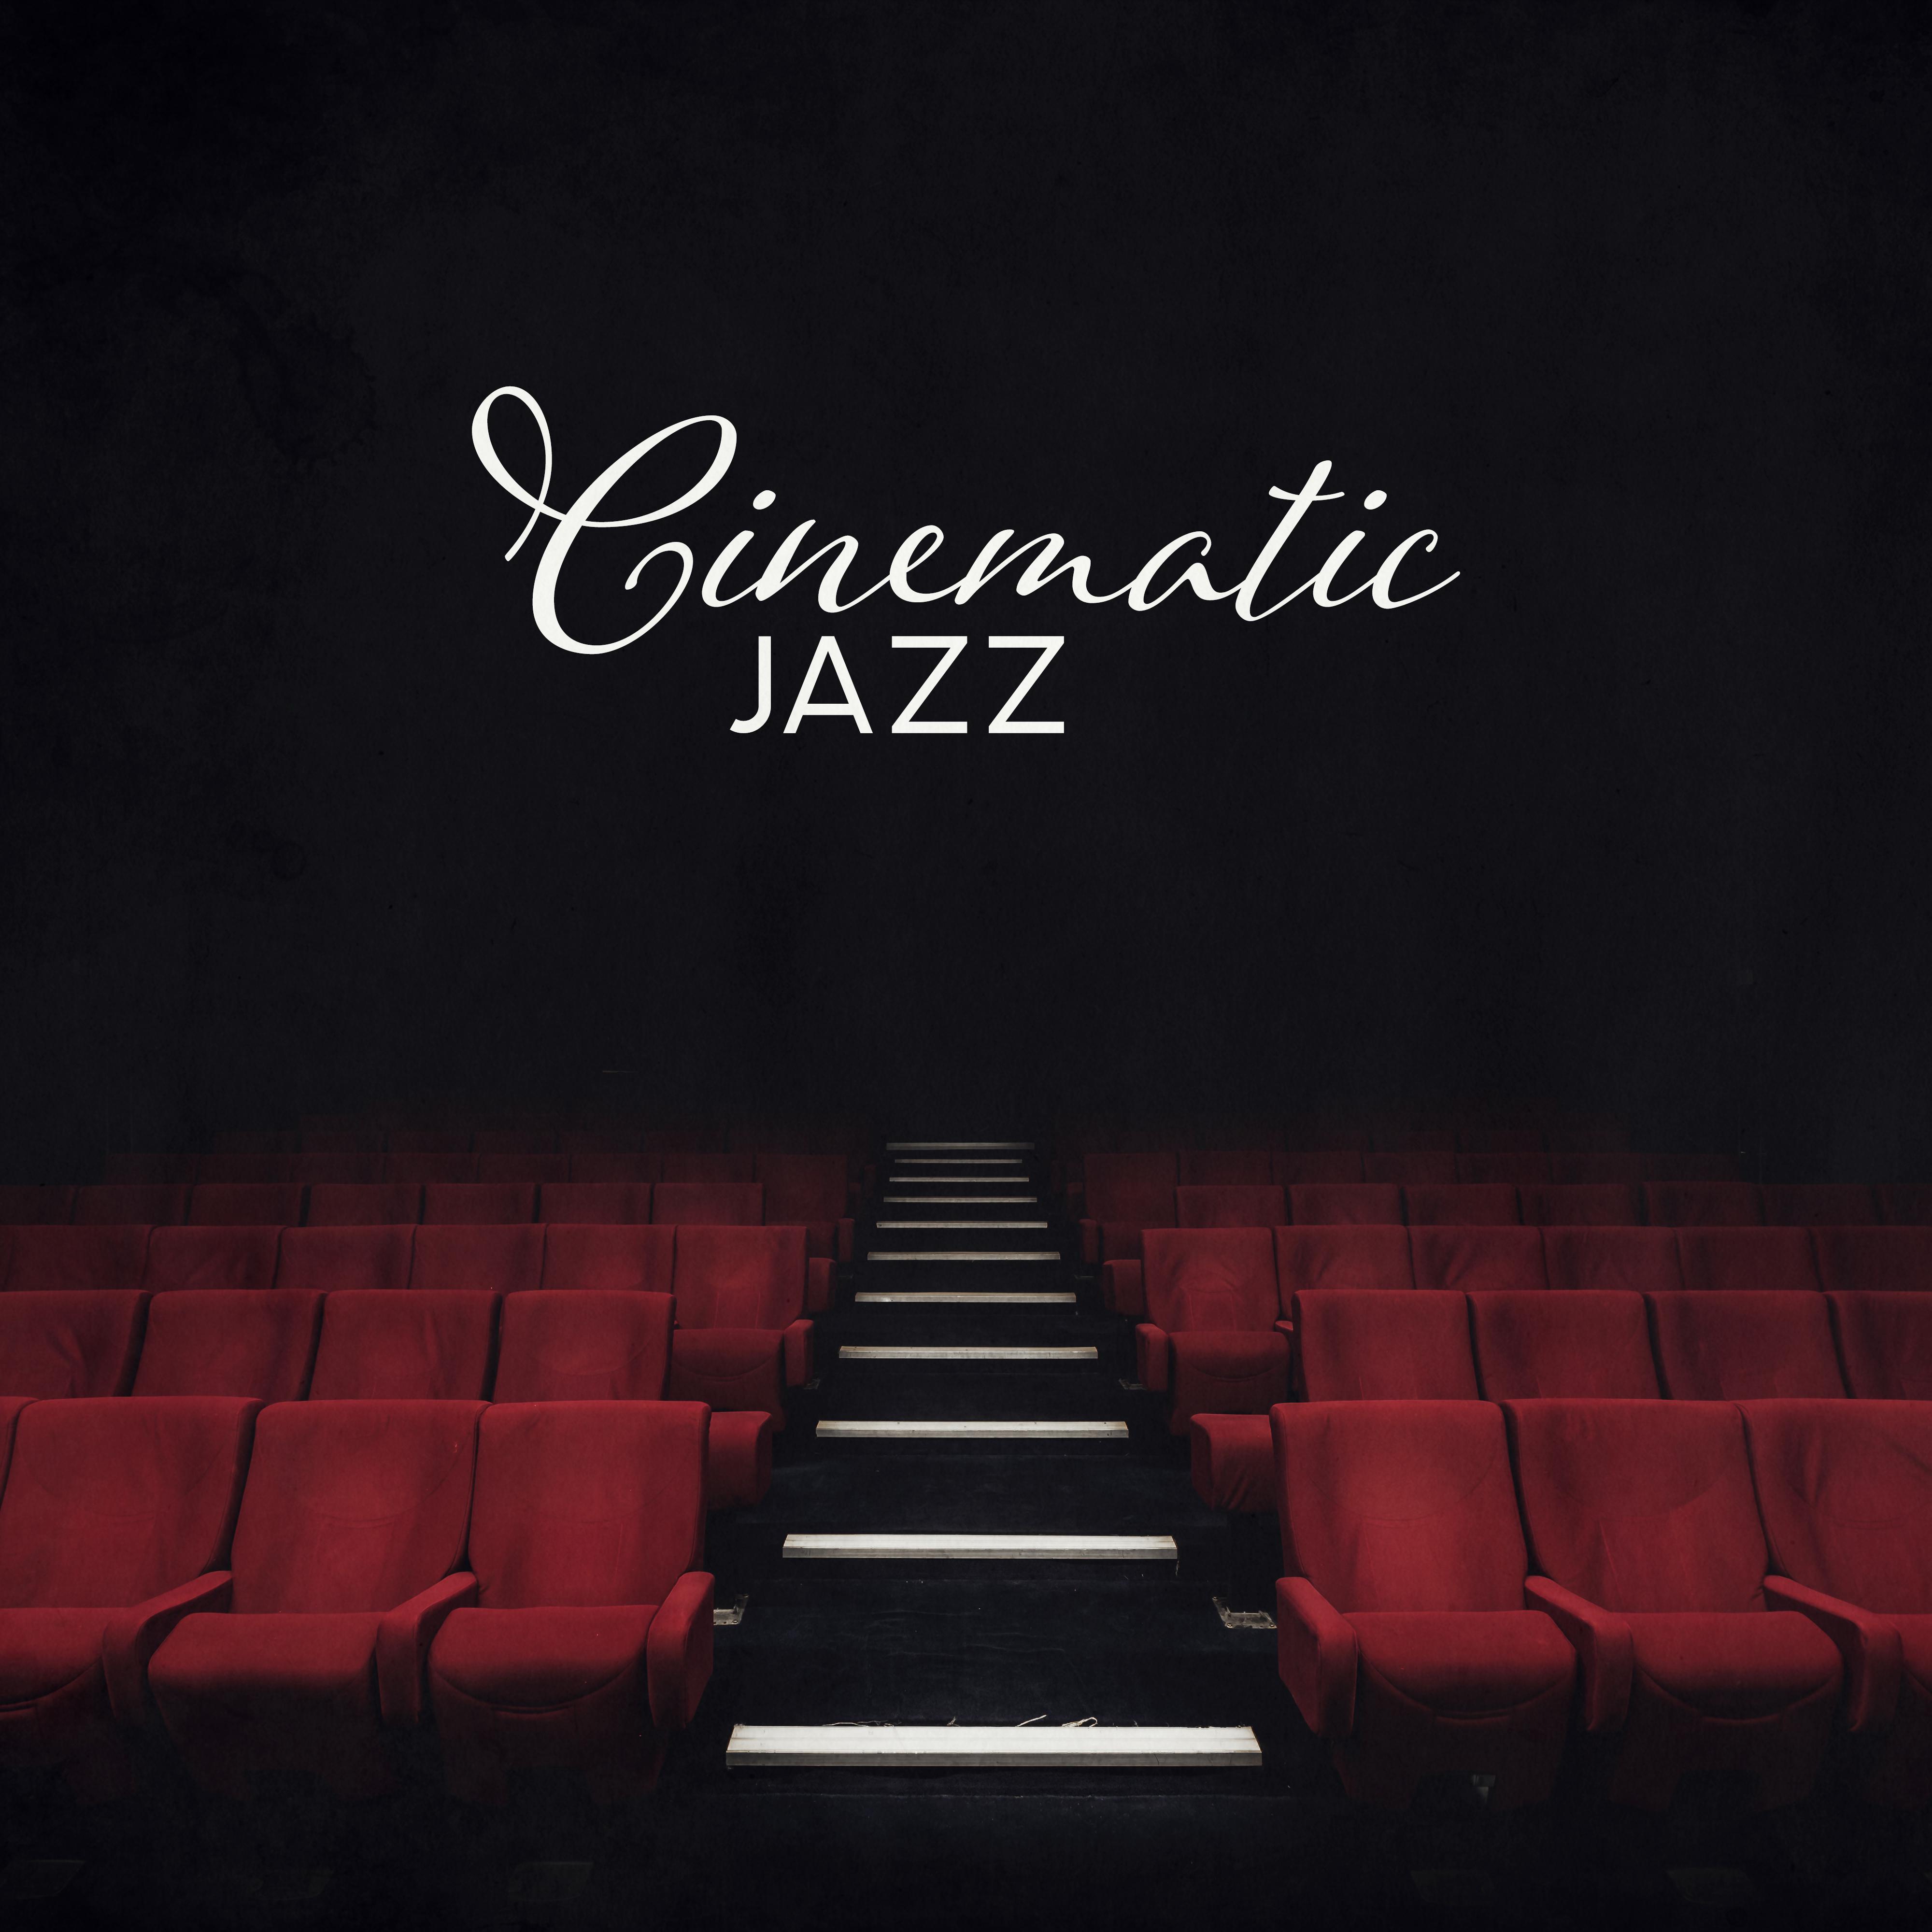 Cinematic Jazz: Music with a Slight Comedic and Romantic Tone